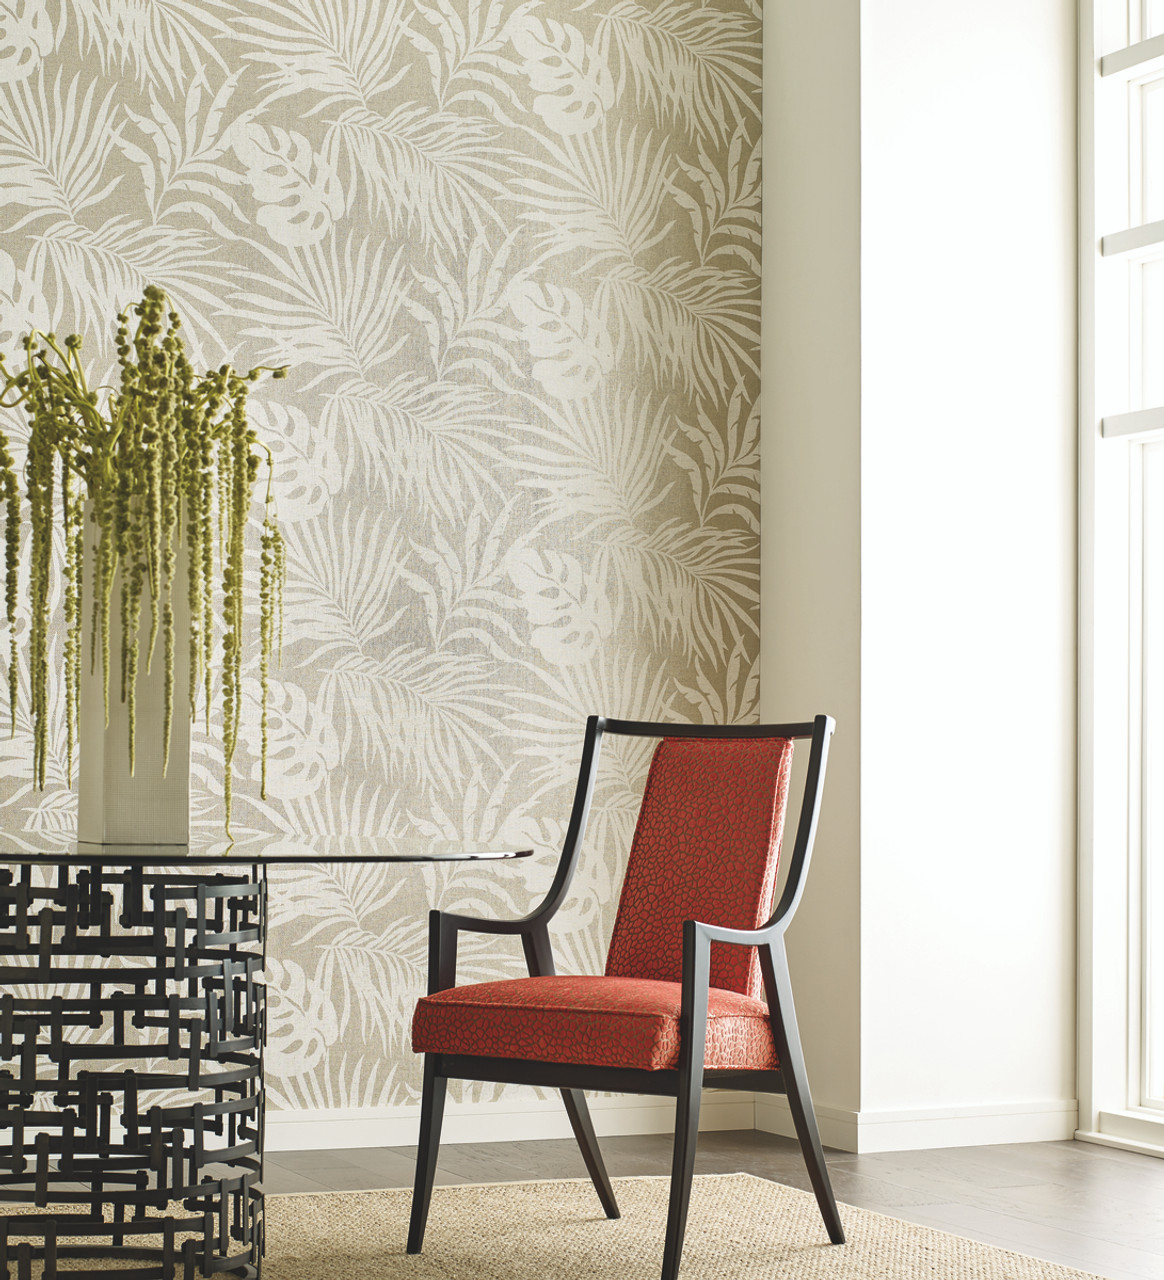 York So2494 Candice Olson Tranquil Paradise Palm Wallpaper Beige The Savvy Decorator